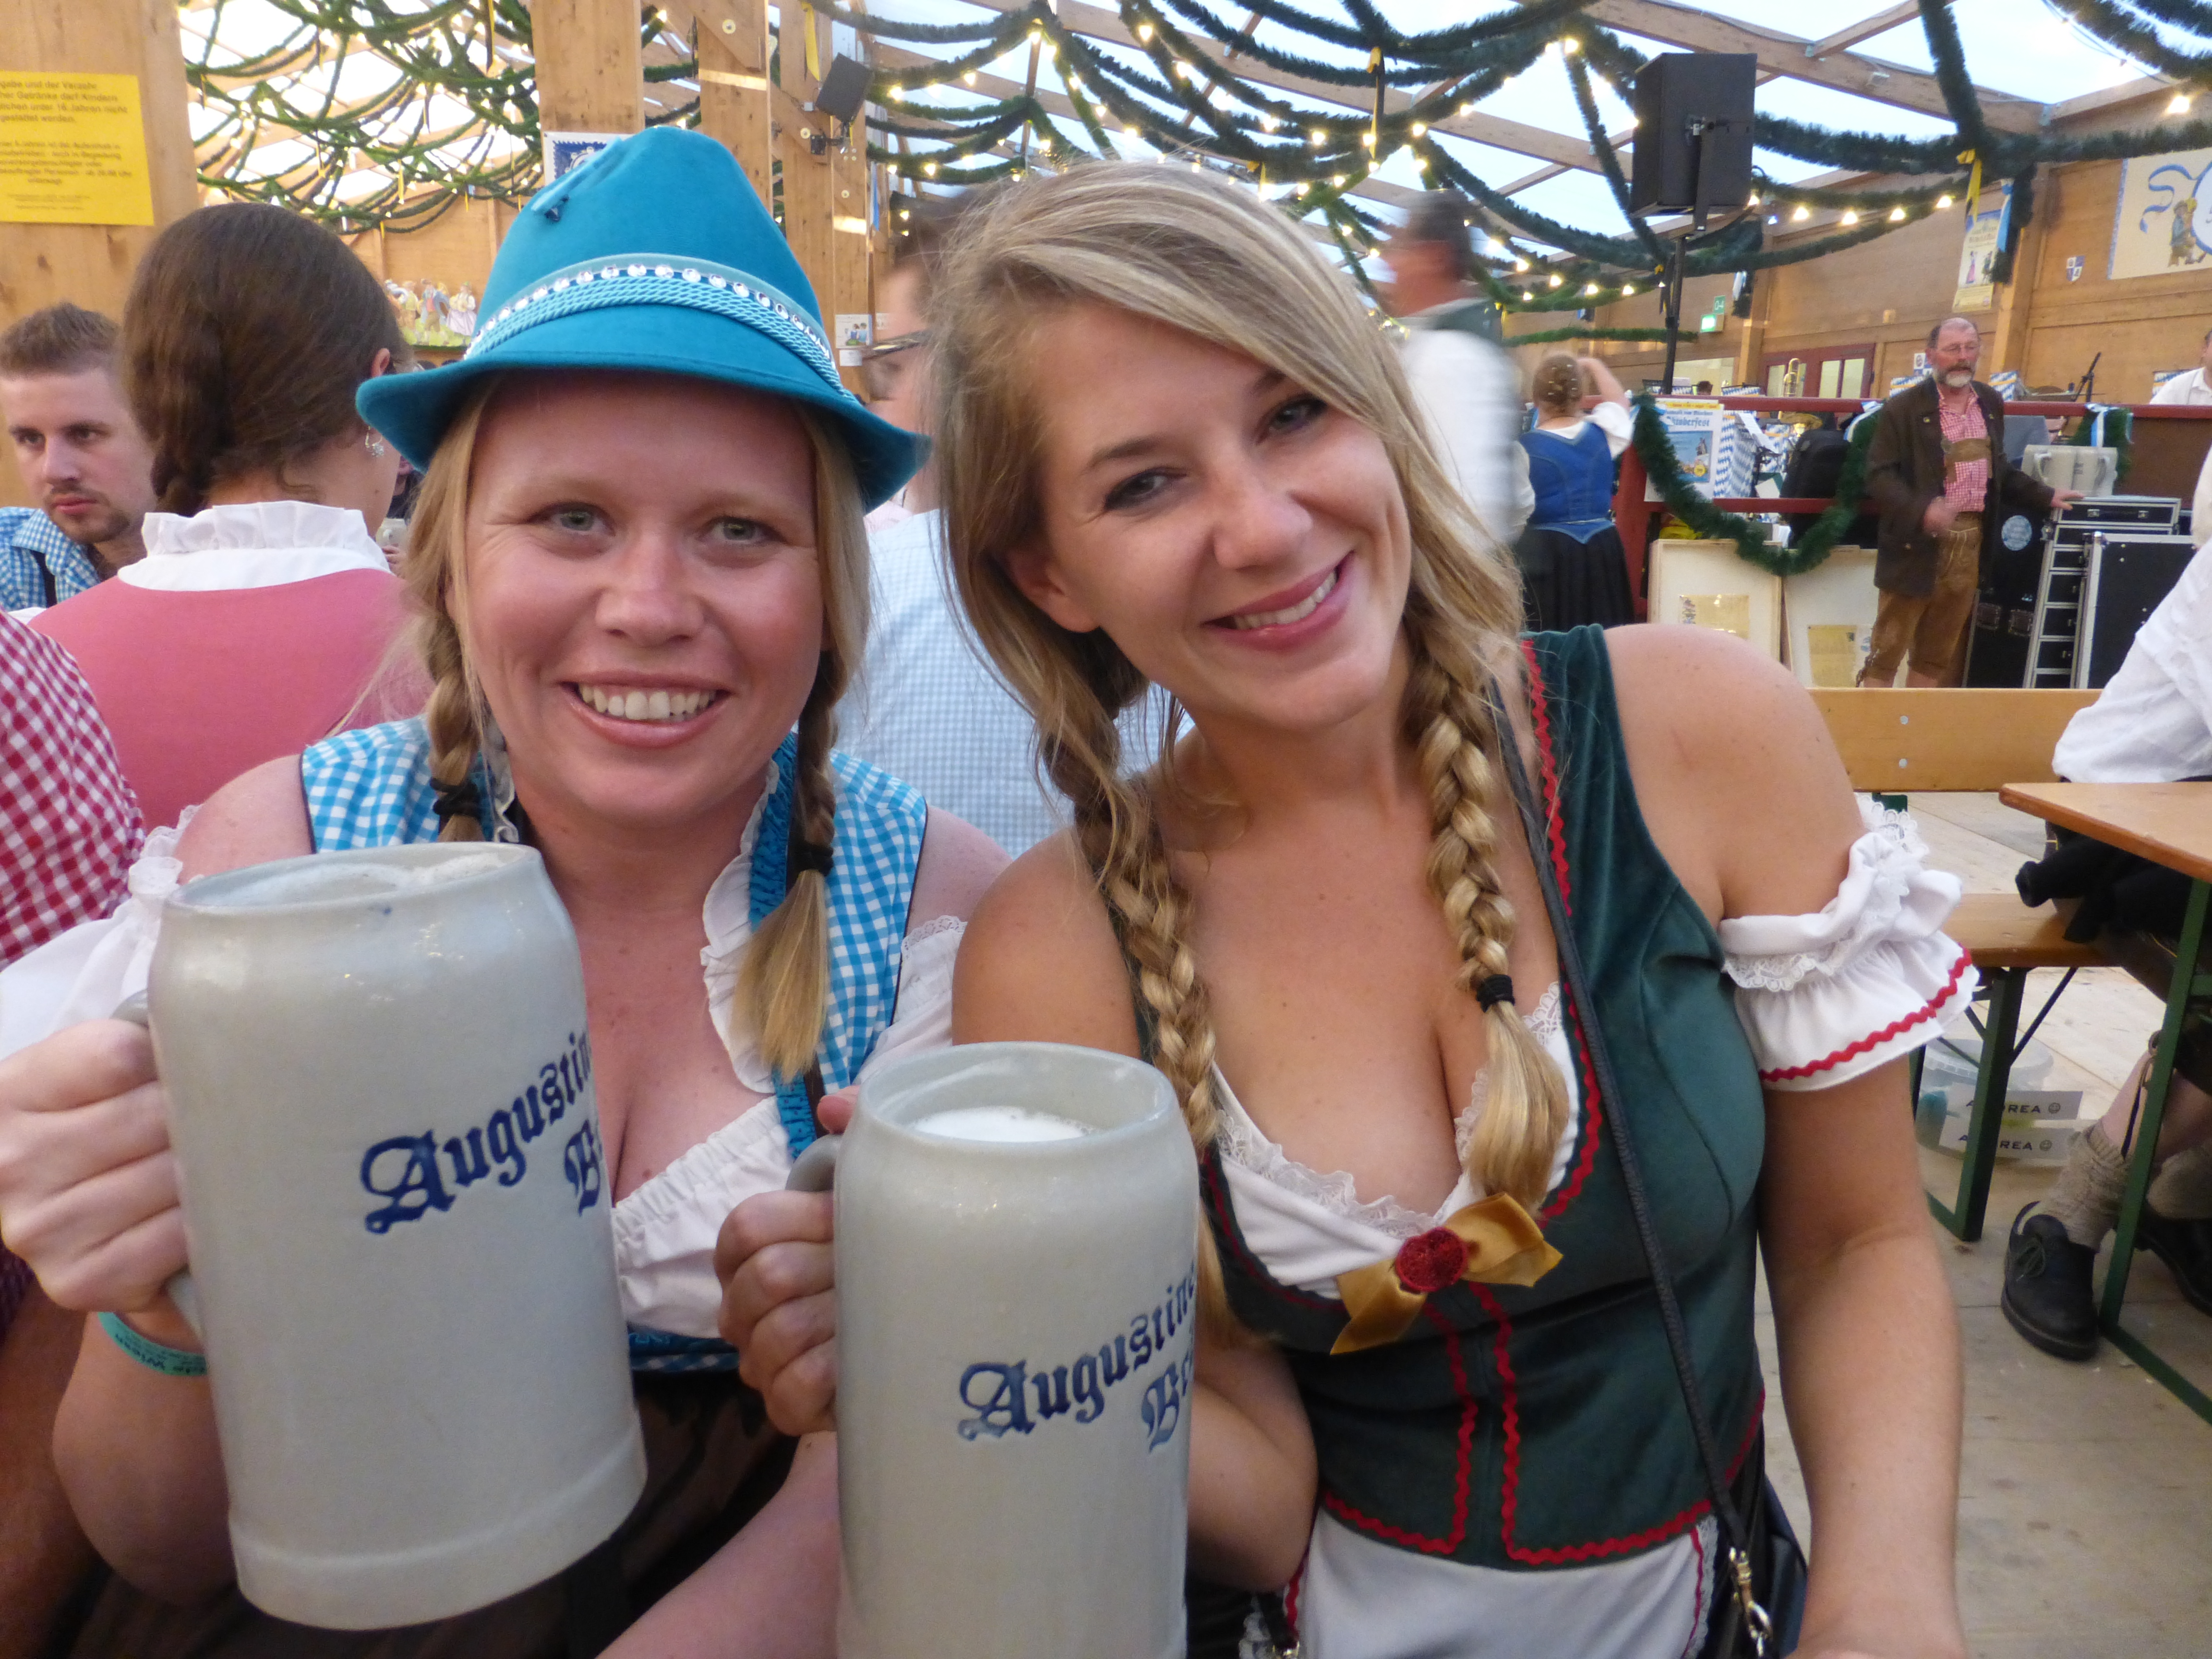 With two pretty blonde ladies in German dirndls accompanying me, finding a ...